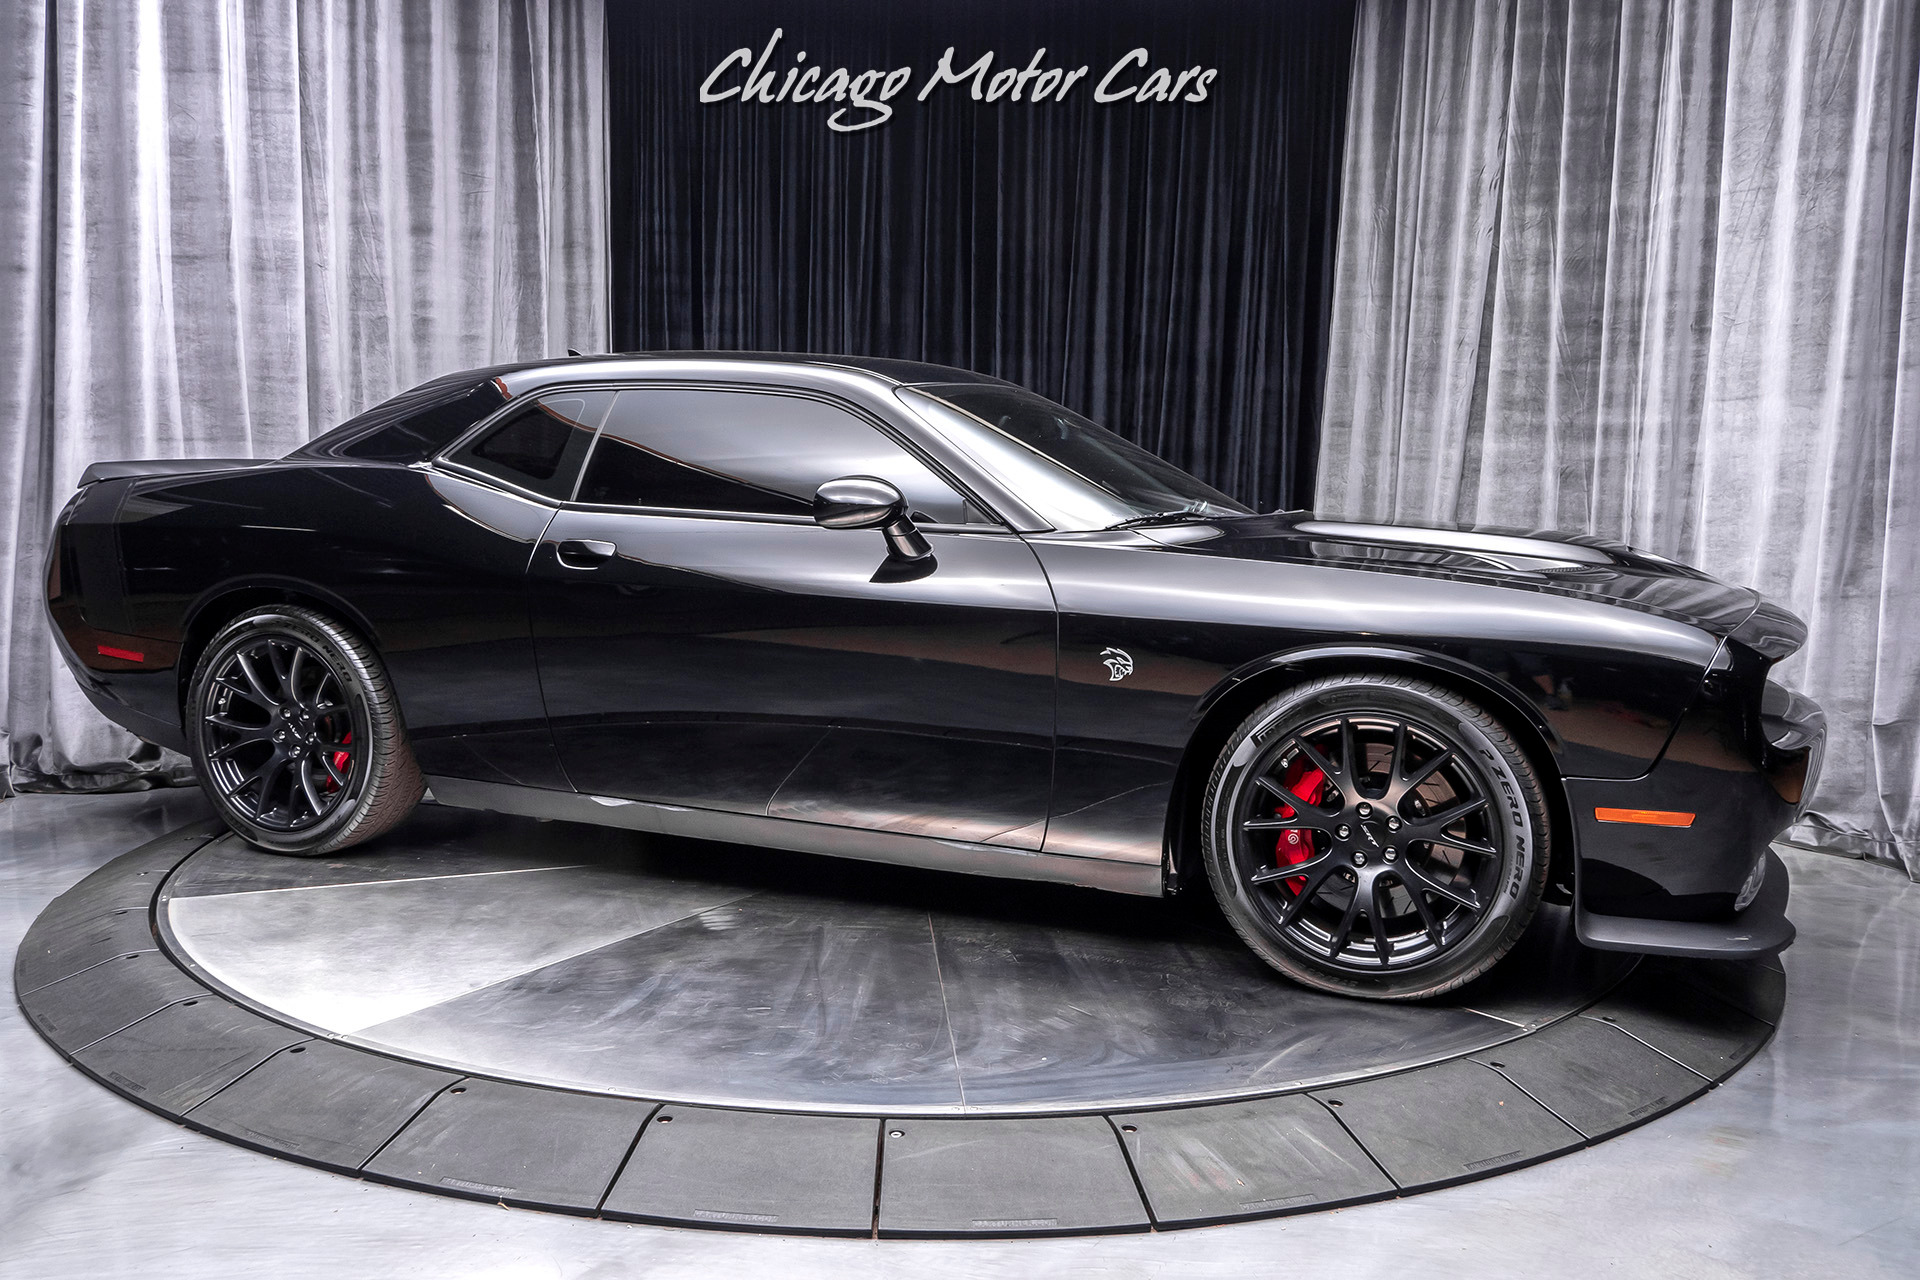 Used-2015-Dodge-Challenger-SRT-Hellcat-Coupe-OVER-800-HORSEPOWER-8-SPEED-AUTOMATIC